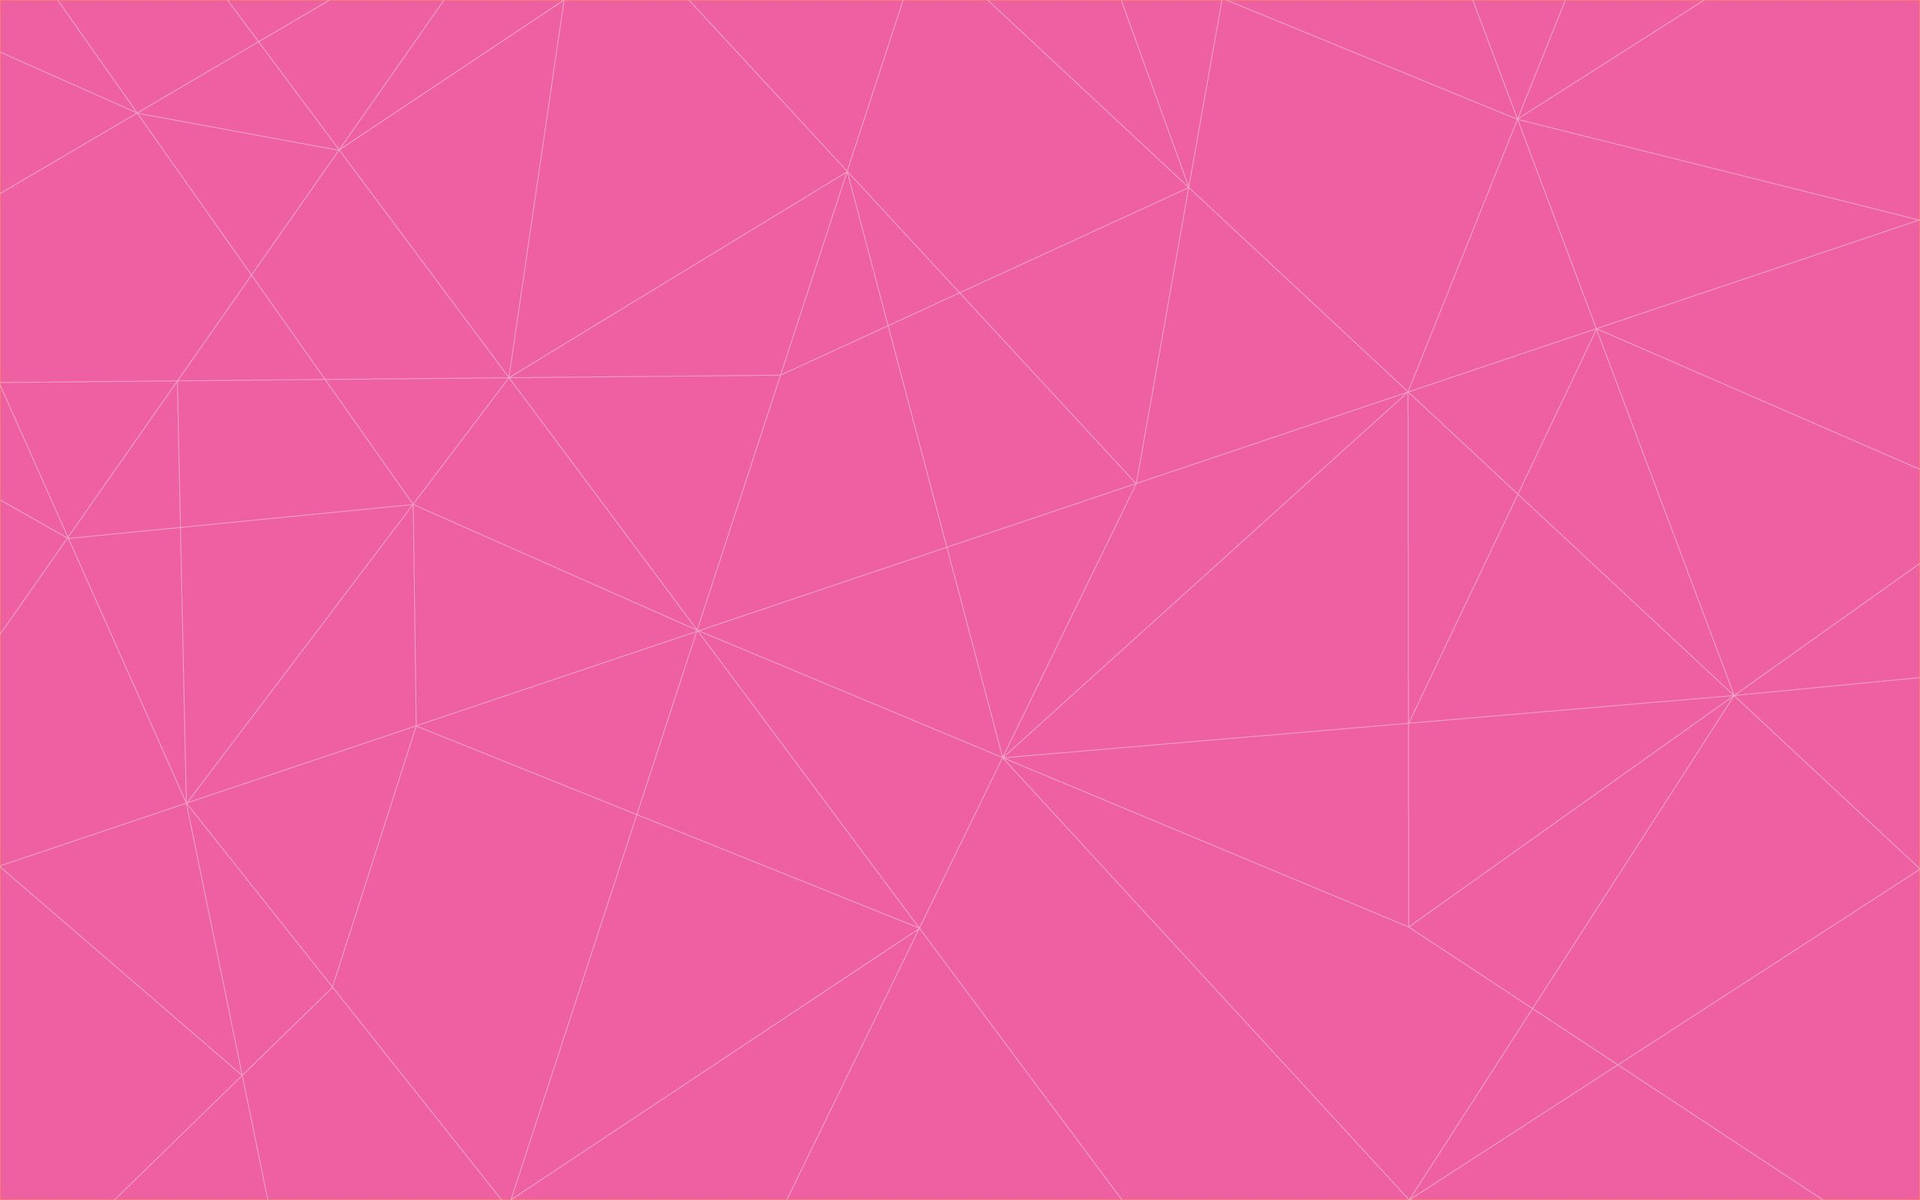 Pink Color With Geometric Lines